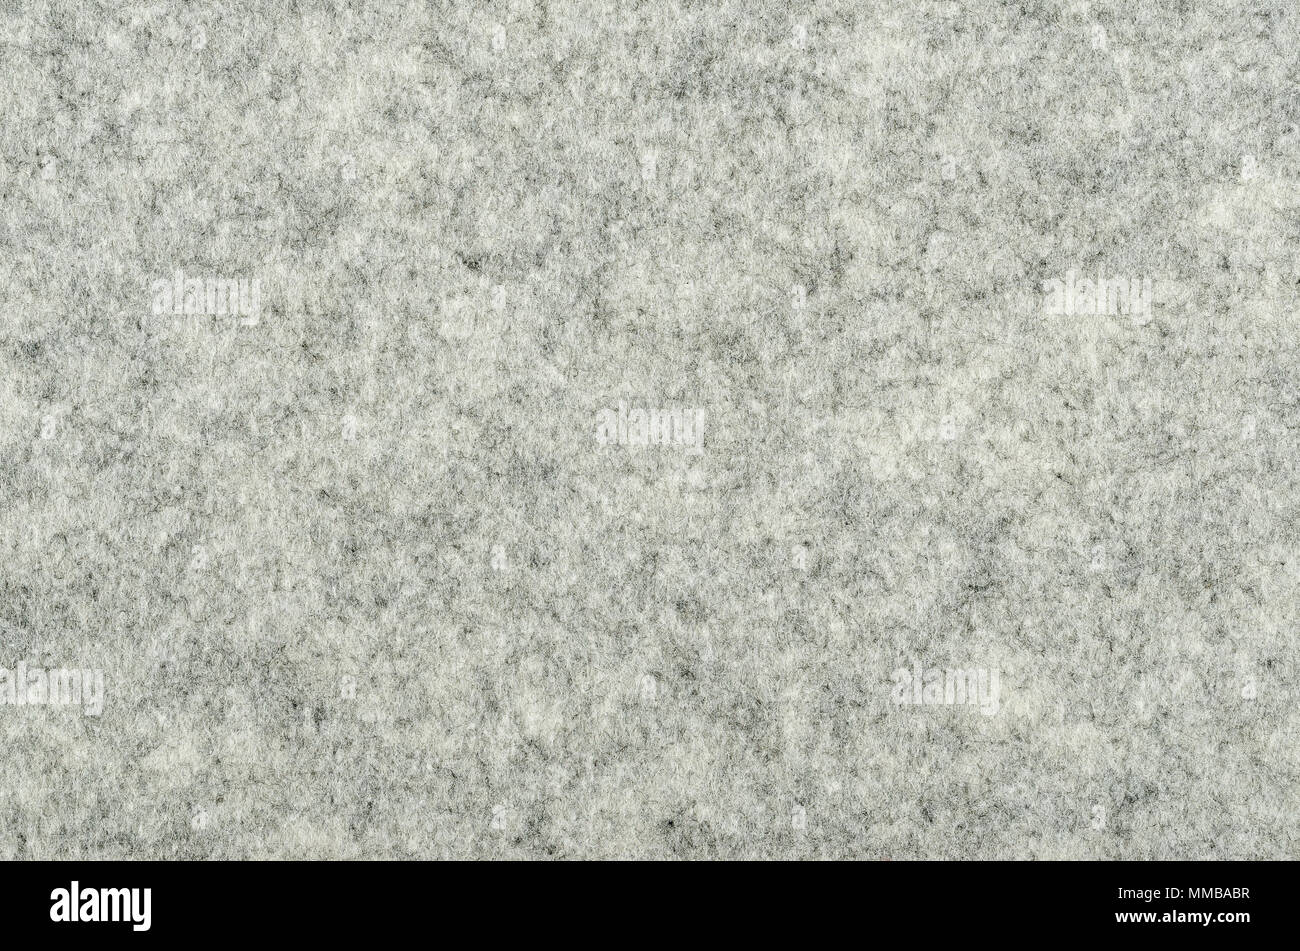 Gray felt surface. Textile material, made of matted synthetic fibers. White, gray and black acrylic pressed together. Fabric pattern. Background. Stock Photo